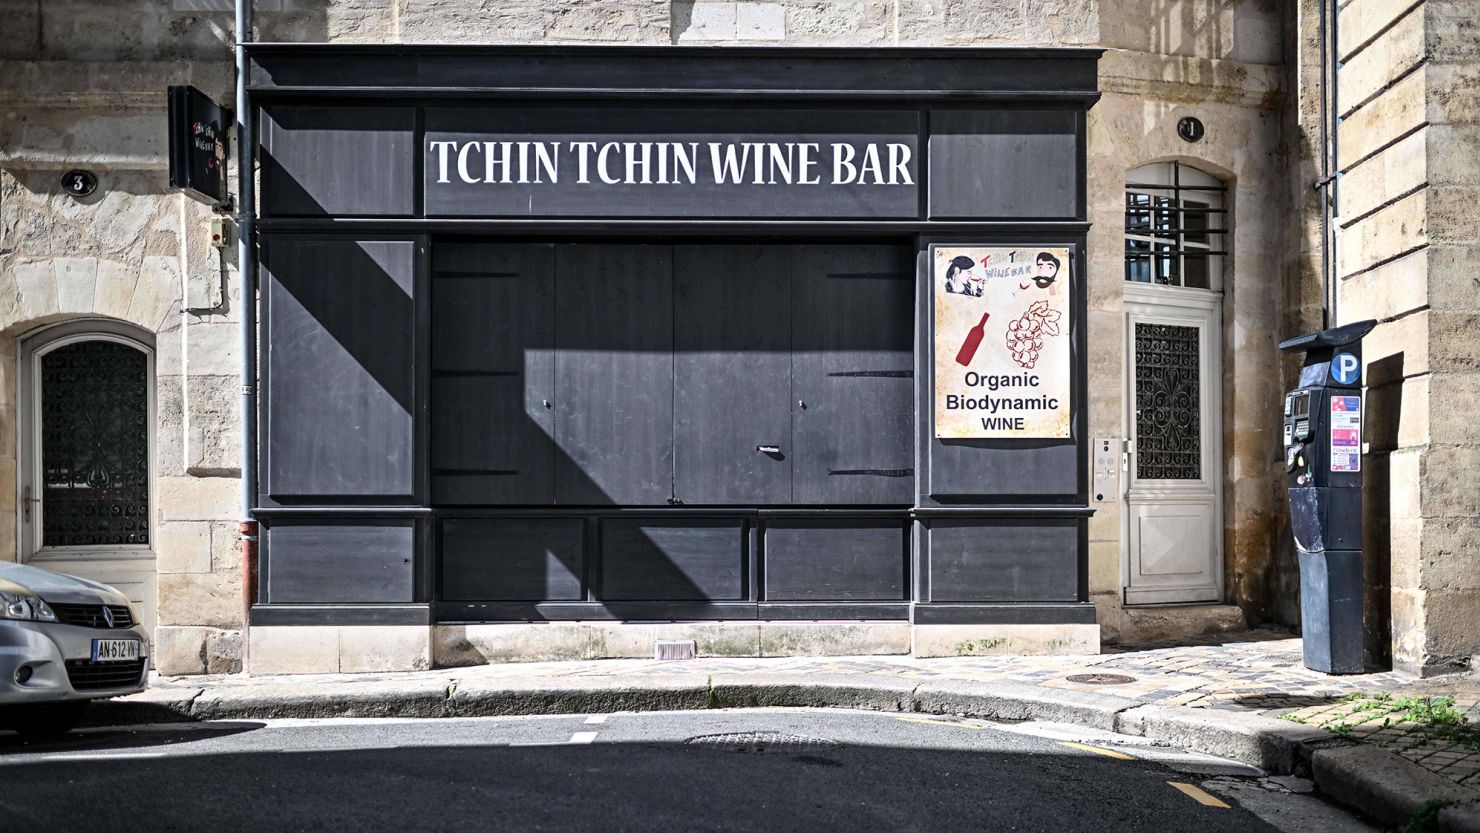 The Tchin Tchin wine bar in Bordeaux, France.